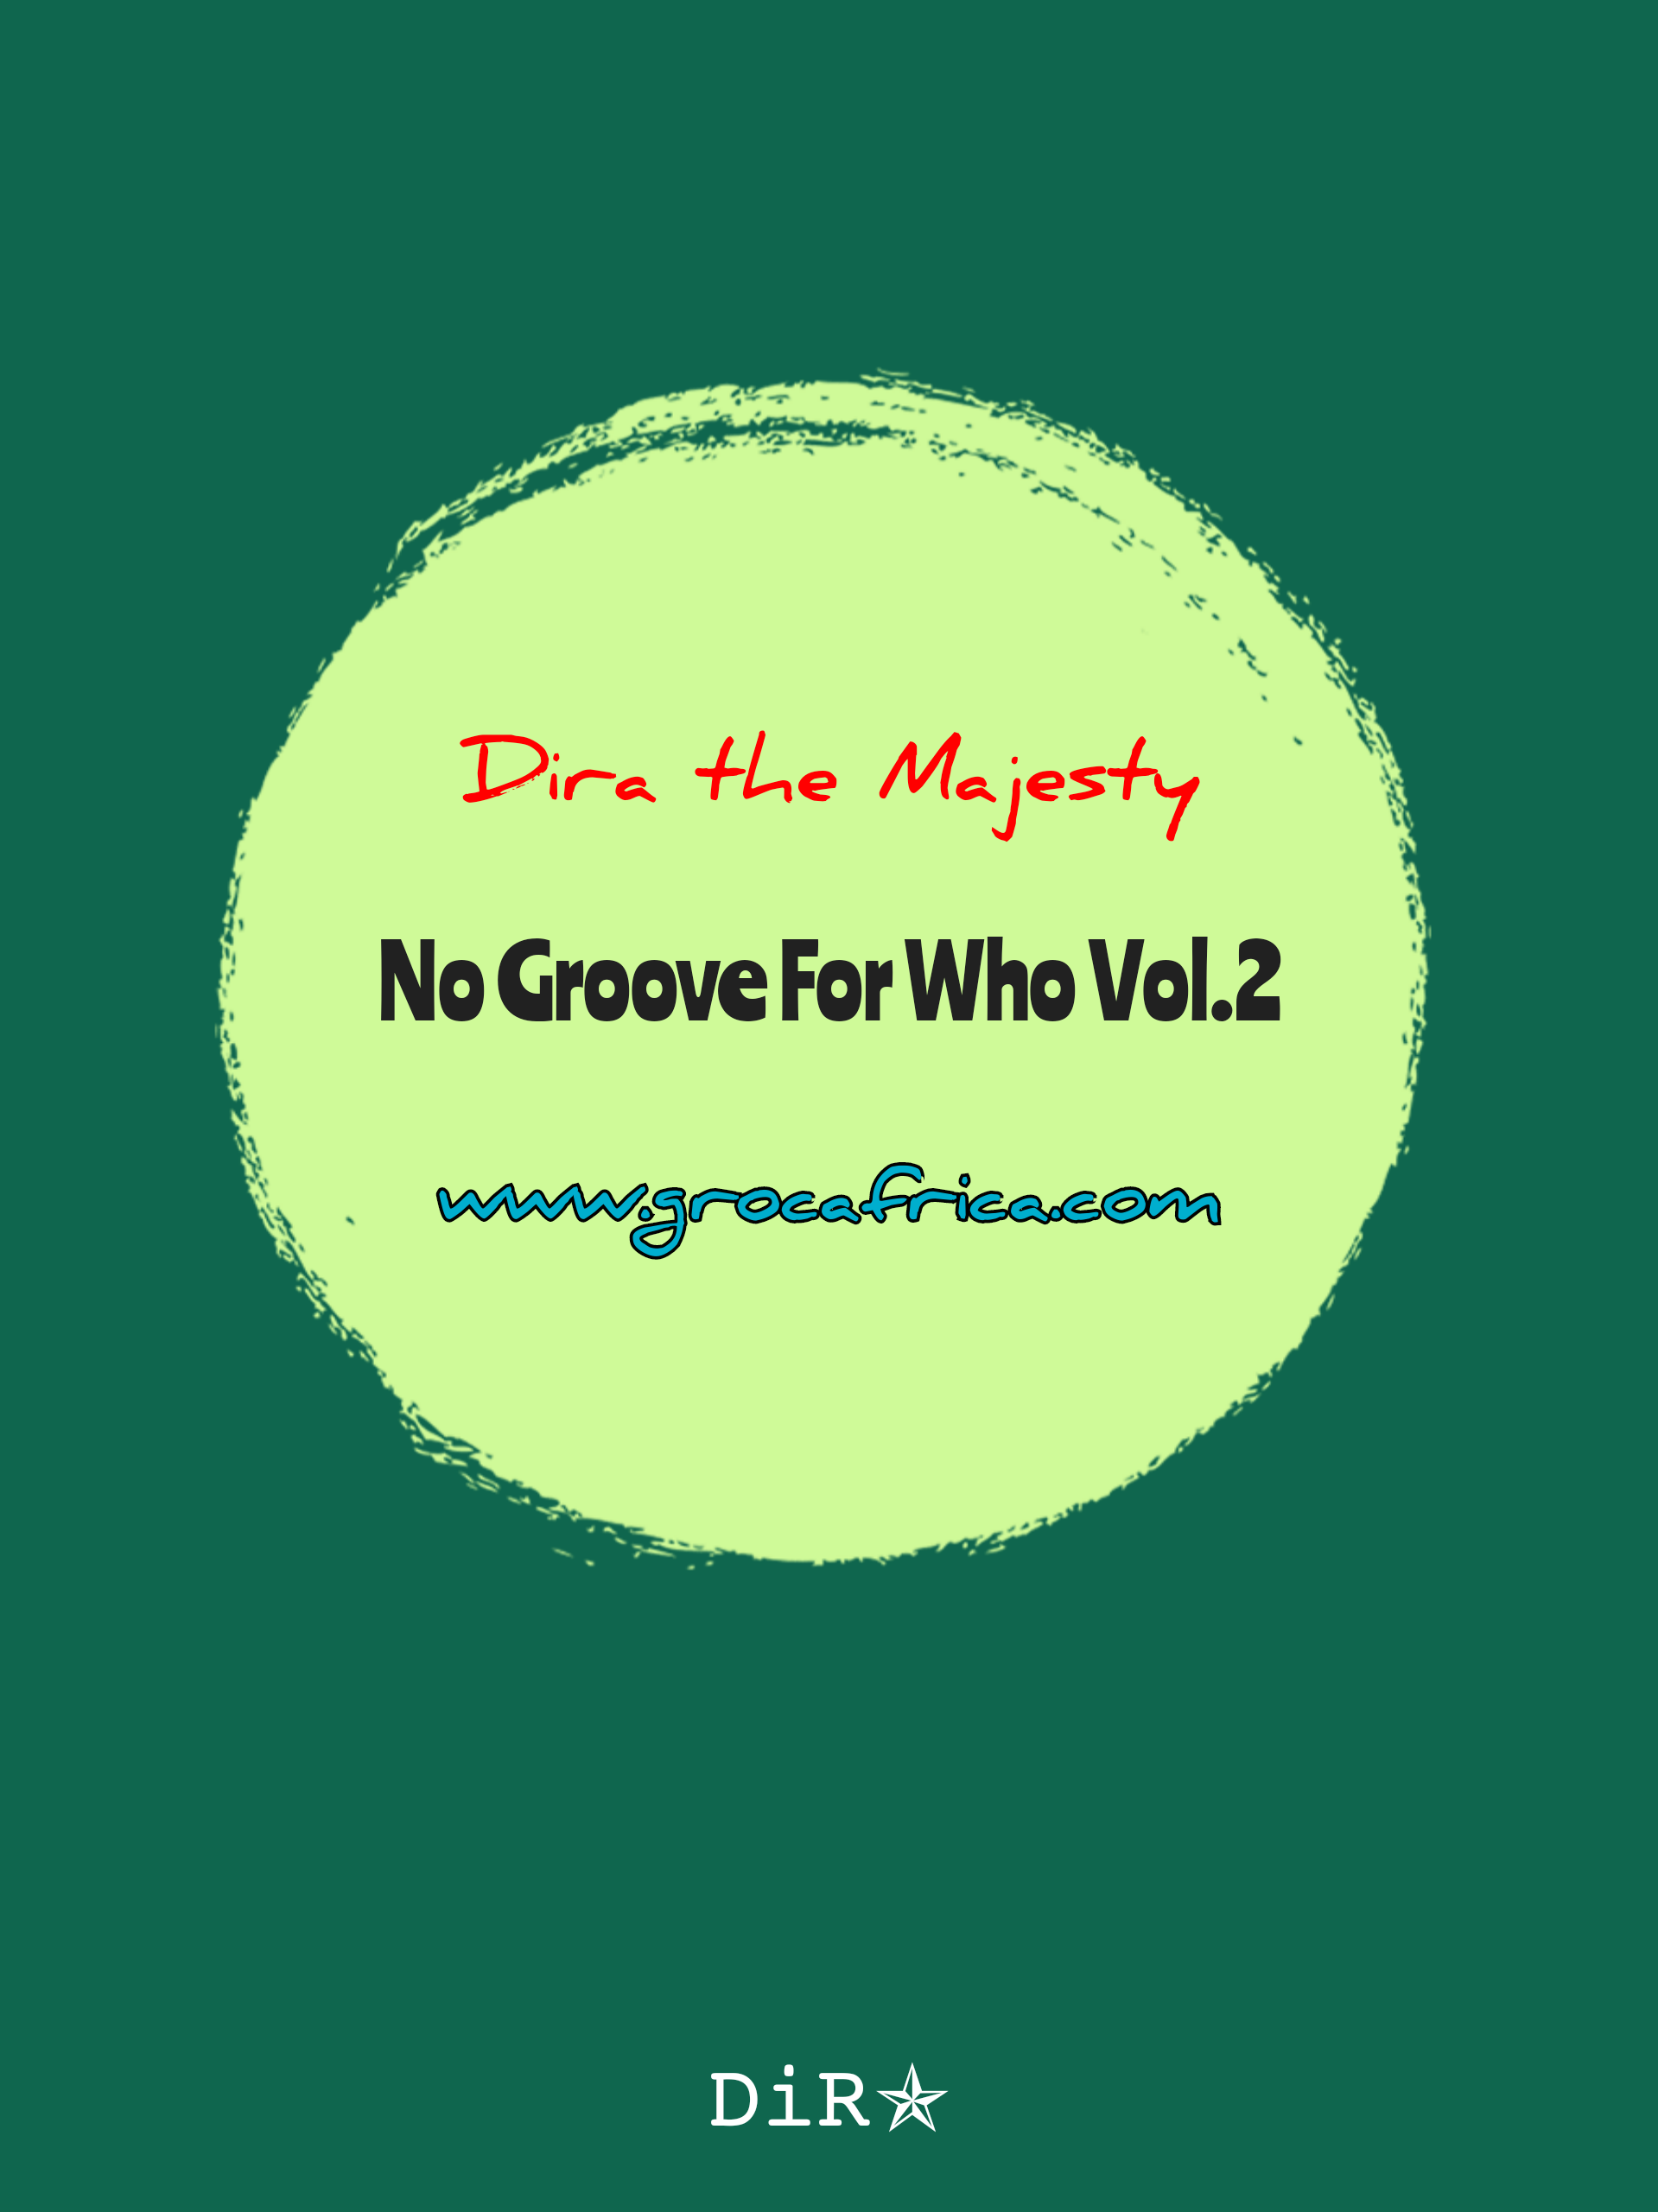 No Groove For Who Vol.2 Image